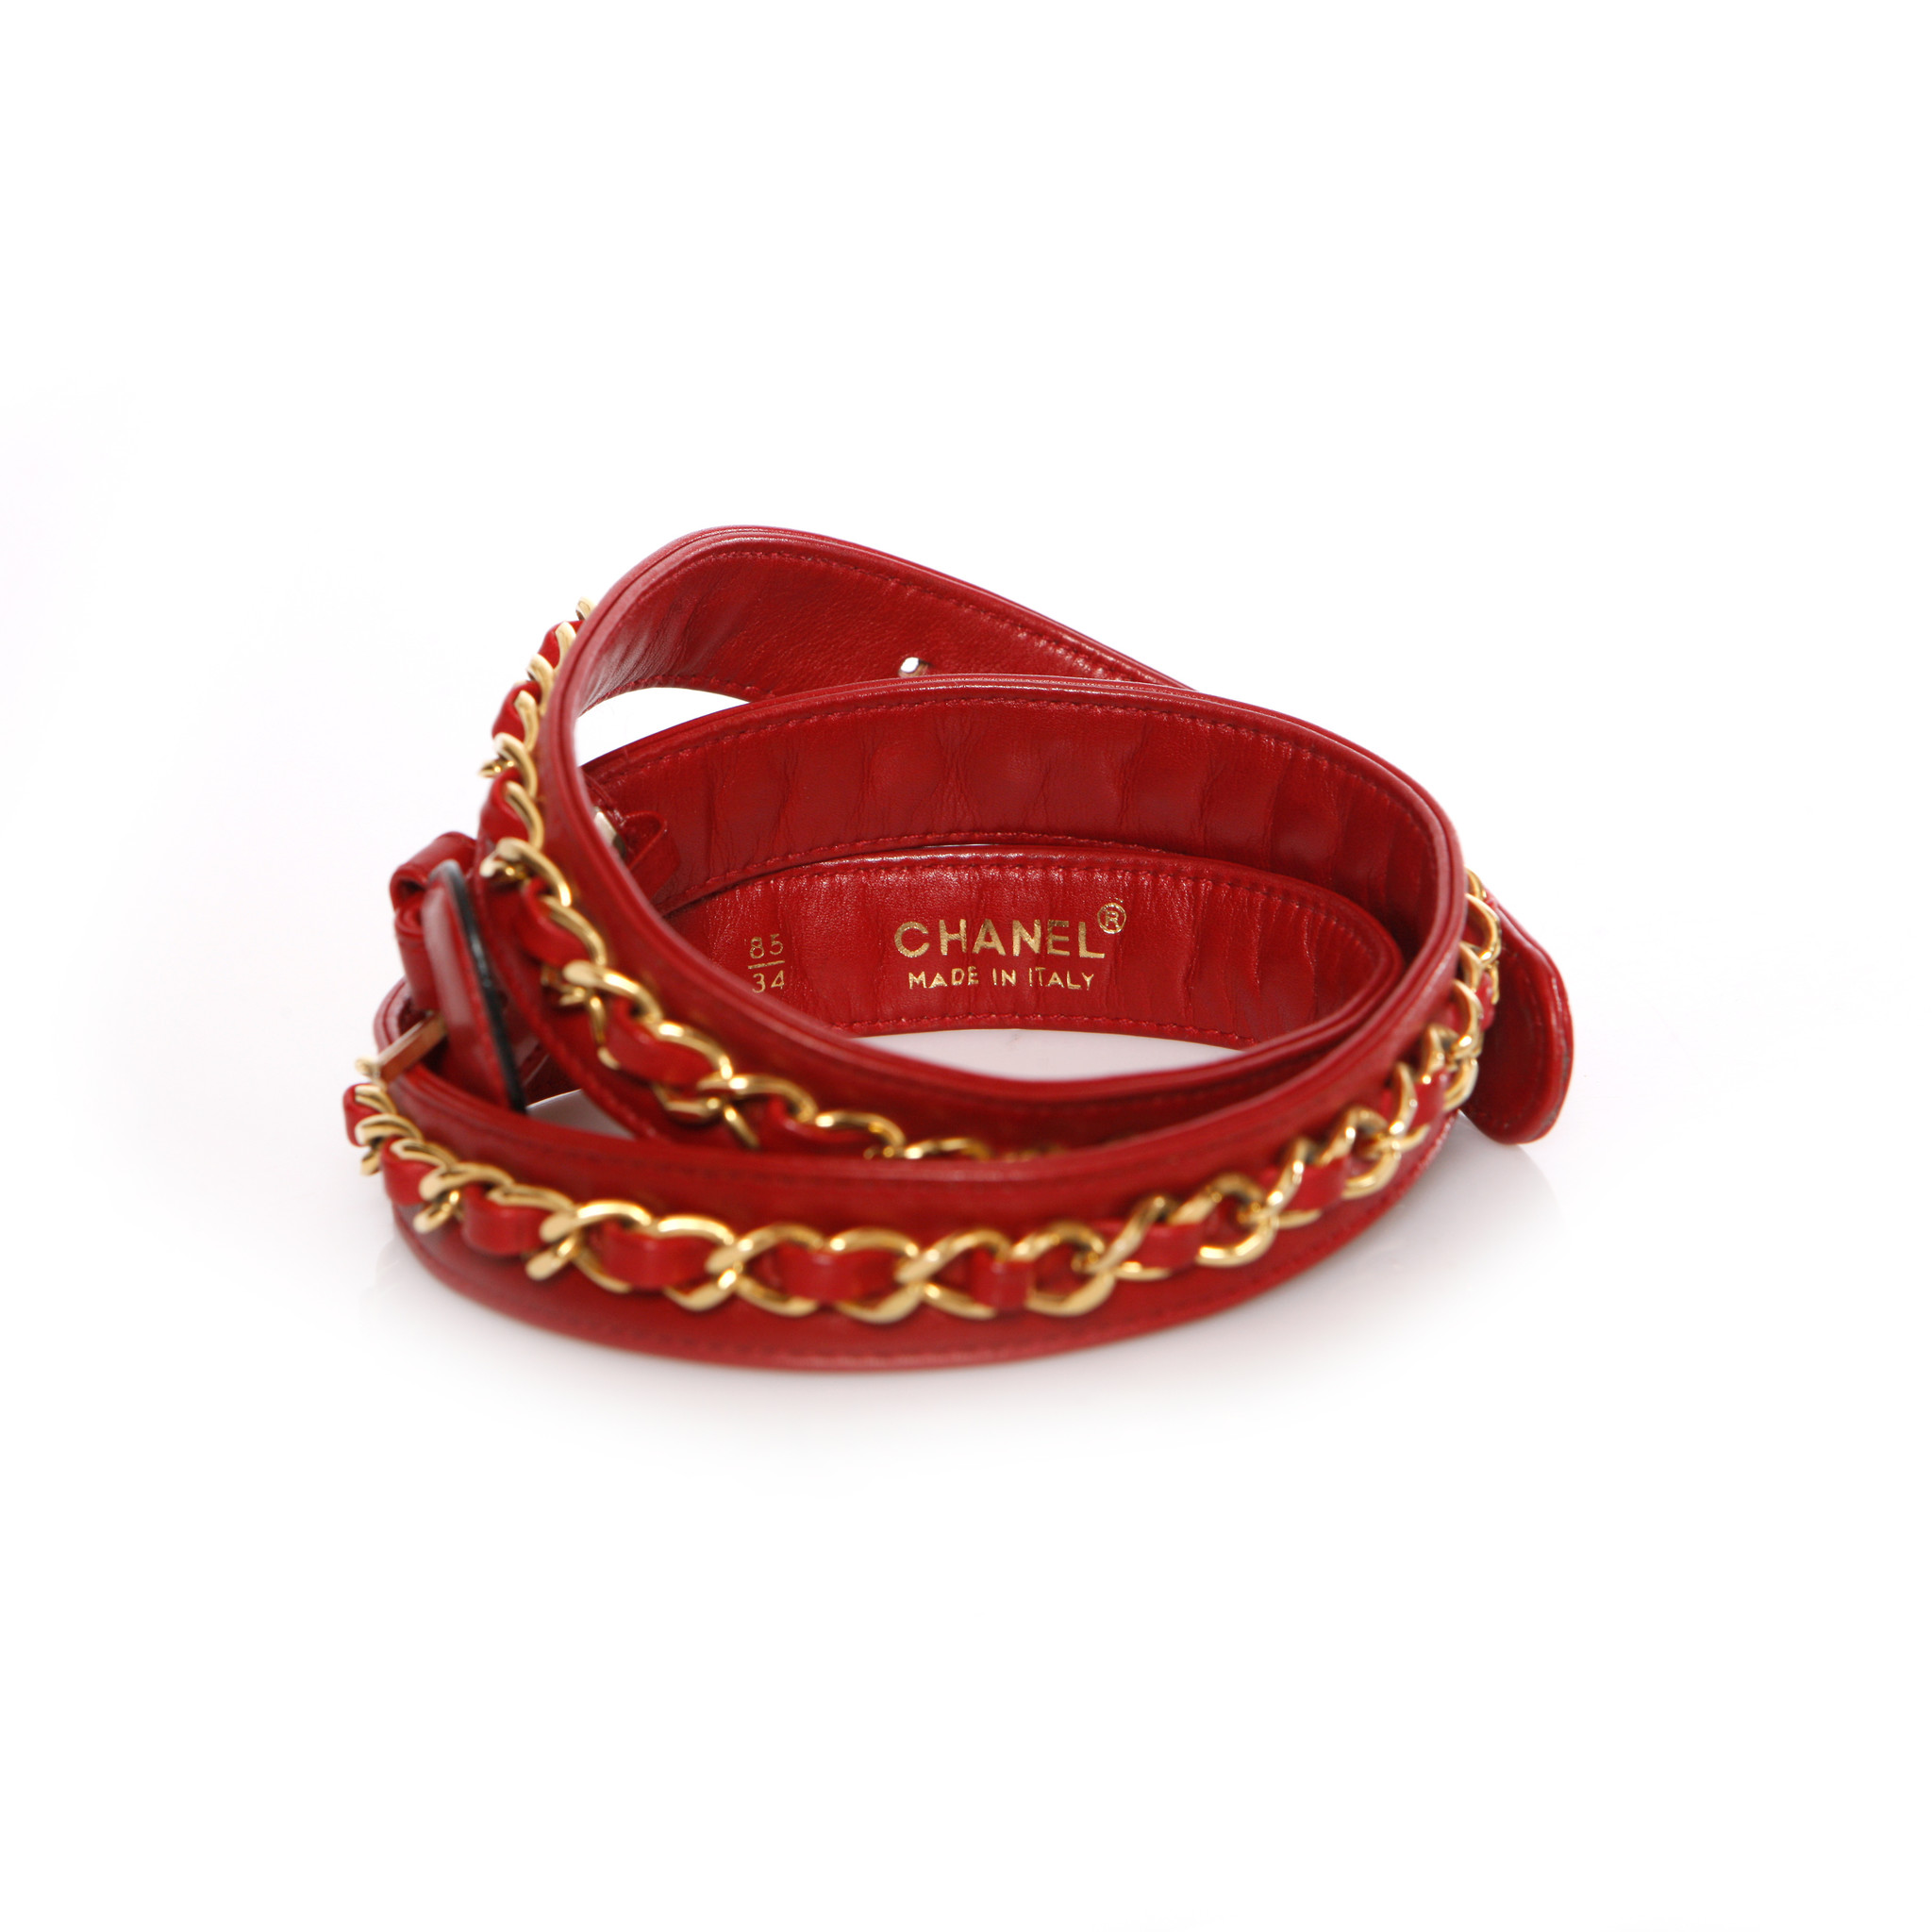 Chanel, Leather belt bag in red/blue/green with gold hardware